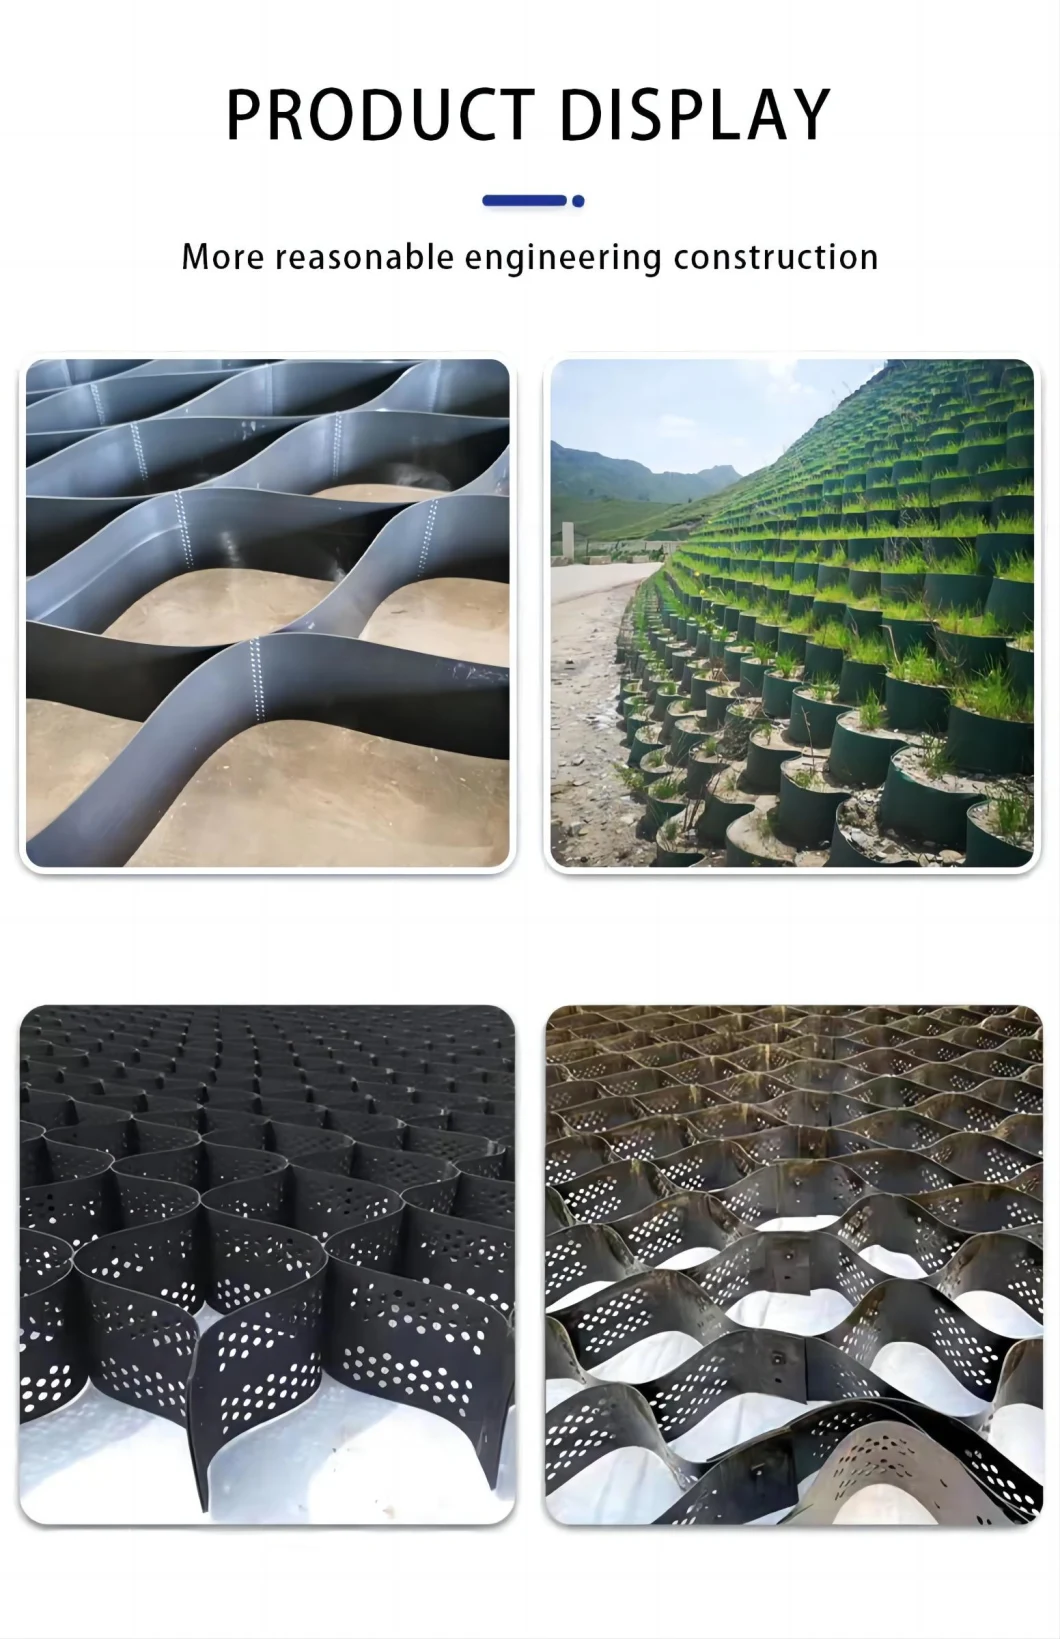 Textured and Perforated HDPE Plastic Geocell Geoweb System Gravel Grid Geo Cell for Road Construction Sold